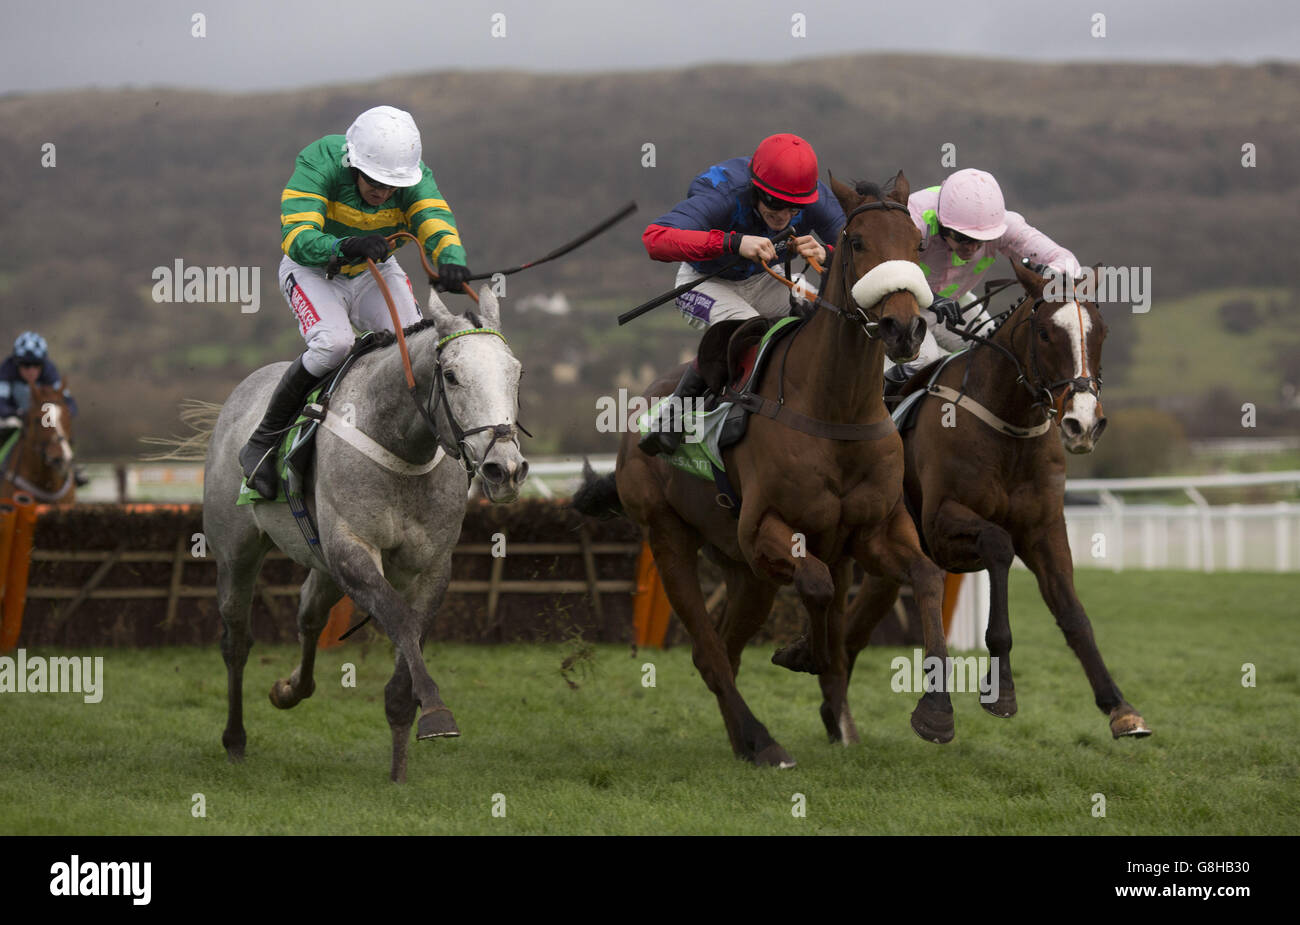 Old Guard ridden by Sam Twiston-Davies (centre) gets the better of Hagam ridden by Barry Geraghty (left) and Sempre Medici ridden by Ruby Walsh (right) before going on to win The StanJames.com International Hurdle Race run during day two of The International at Cheltenham Racecourse. Stock Photo